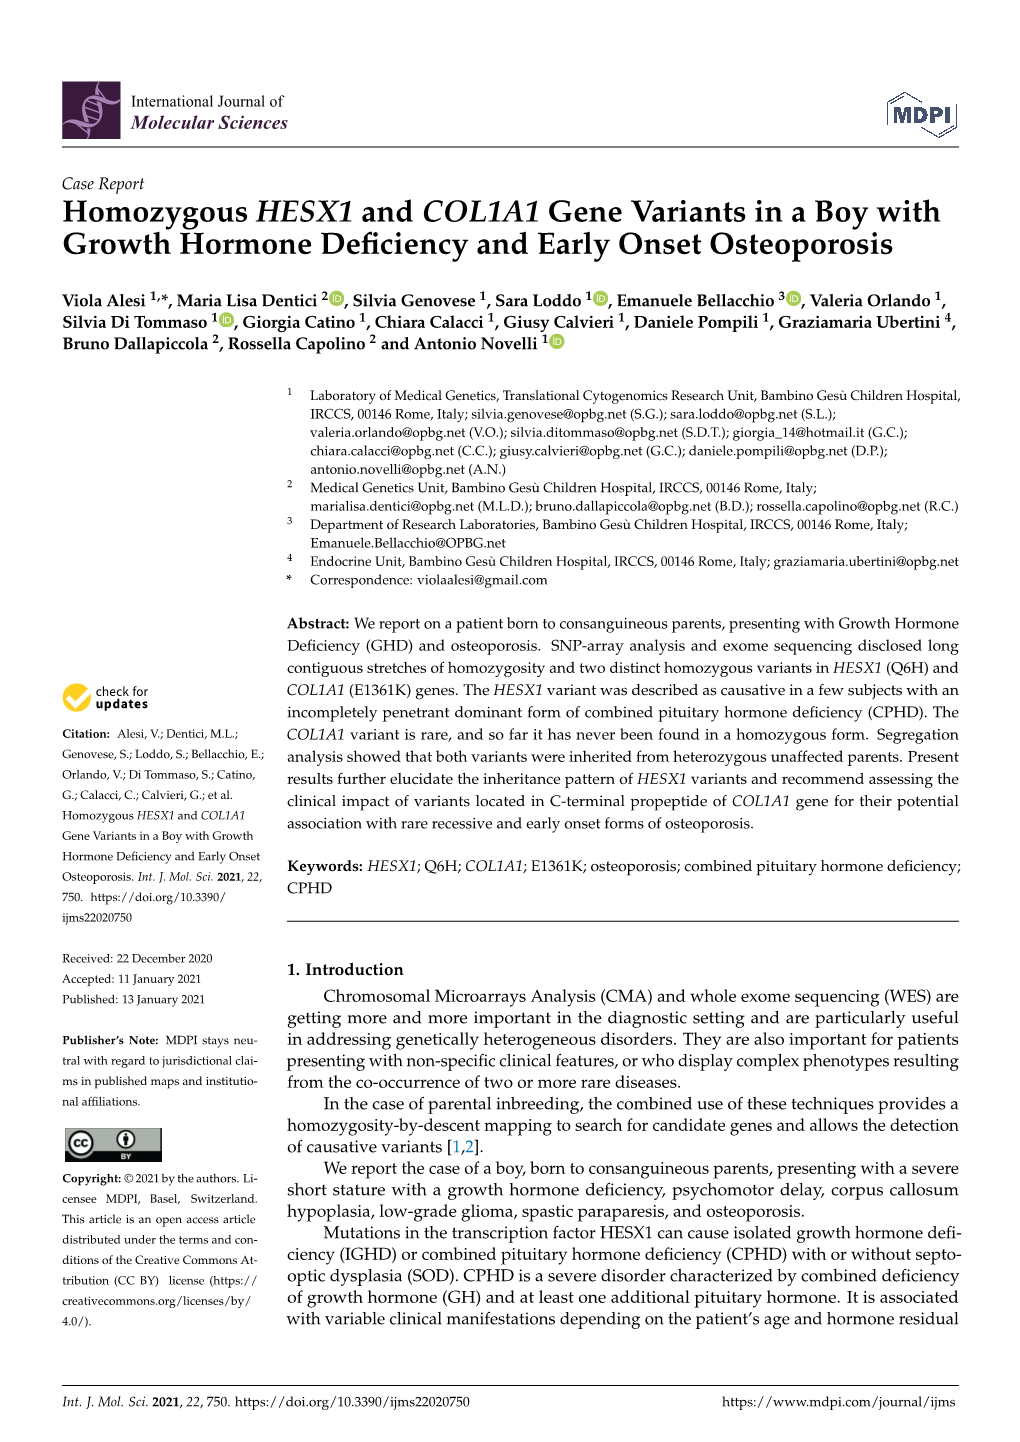 Homozygous HESX1 and COL1A1 Gene Variants in a Boy with Growth Hormone Deﬁciency and Early Onset Osteoporosis